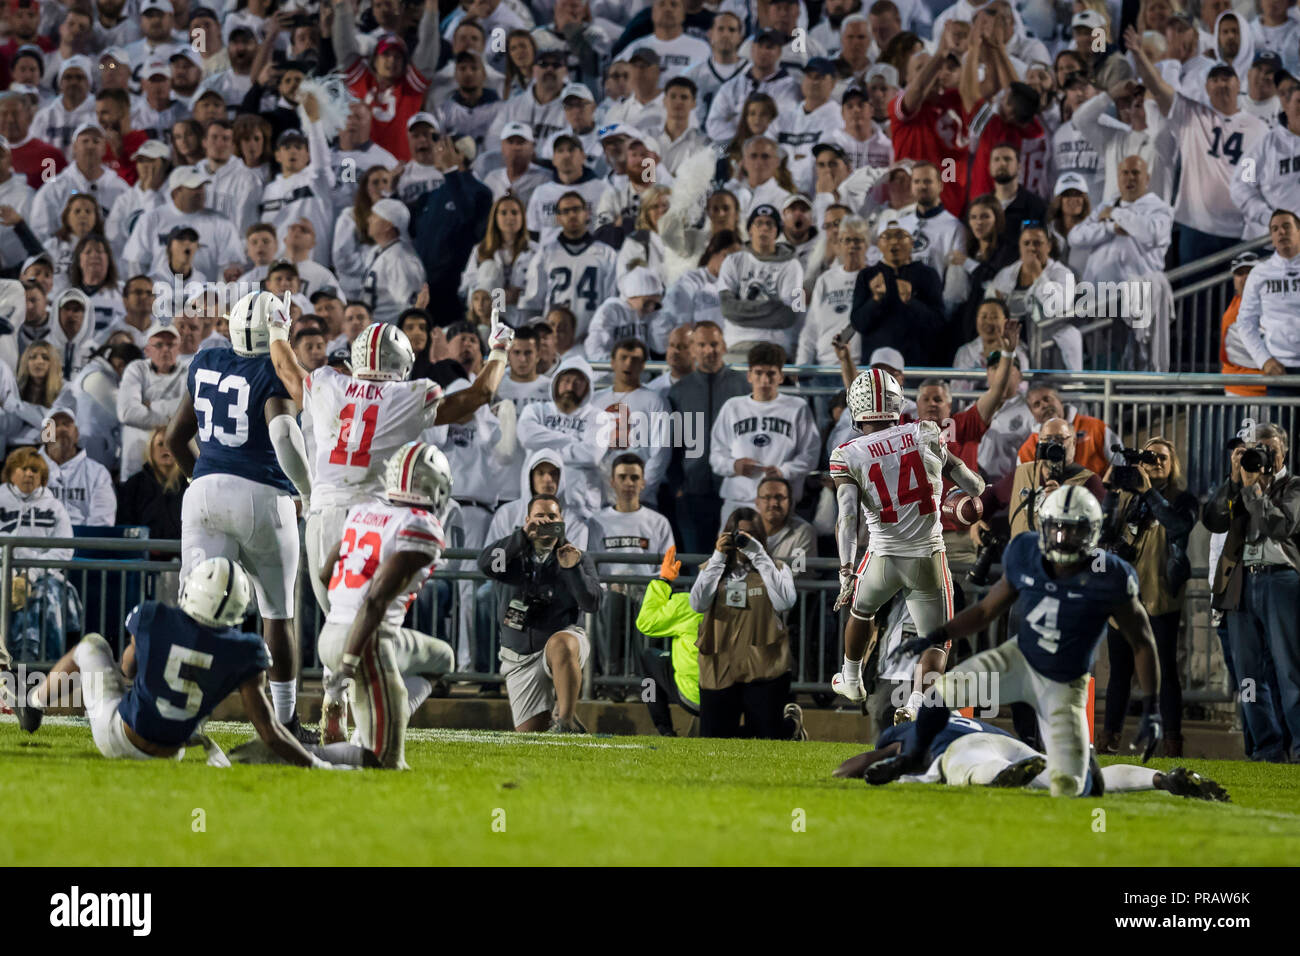 University Park, Pennsylvania, USA. 29th Sep, 2018. Ohio State Buckeyes wide receiver K.J. Hill (14) scores the game winning touchdown during the second half of the NCAA football game between the Ohio State Buckeyes and the Penn State Nittany Lions at Beaver Stadium in University Park, Pennsylvania. Credit: csm/Alamy Live News Stock Photo